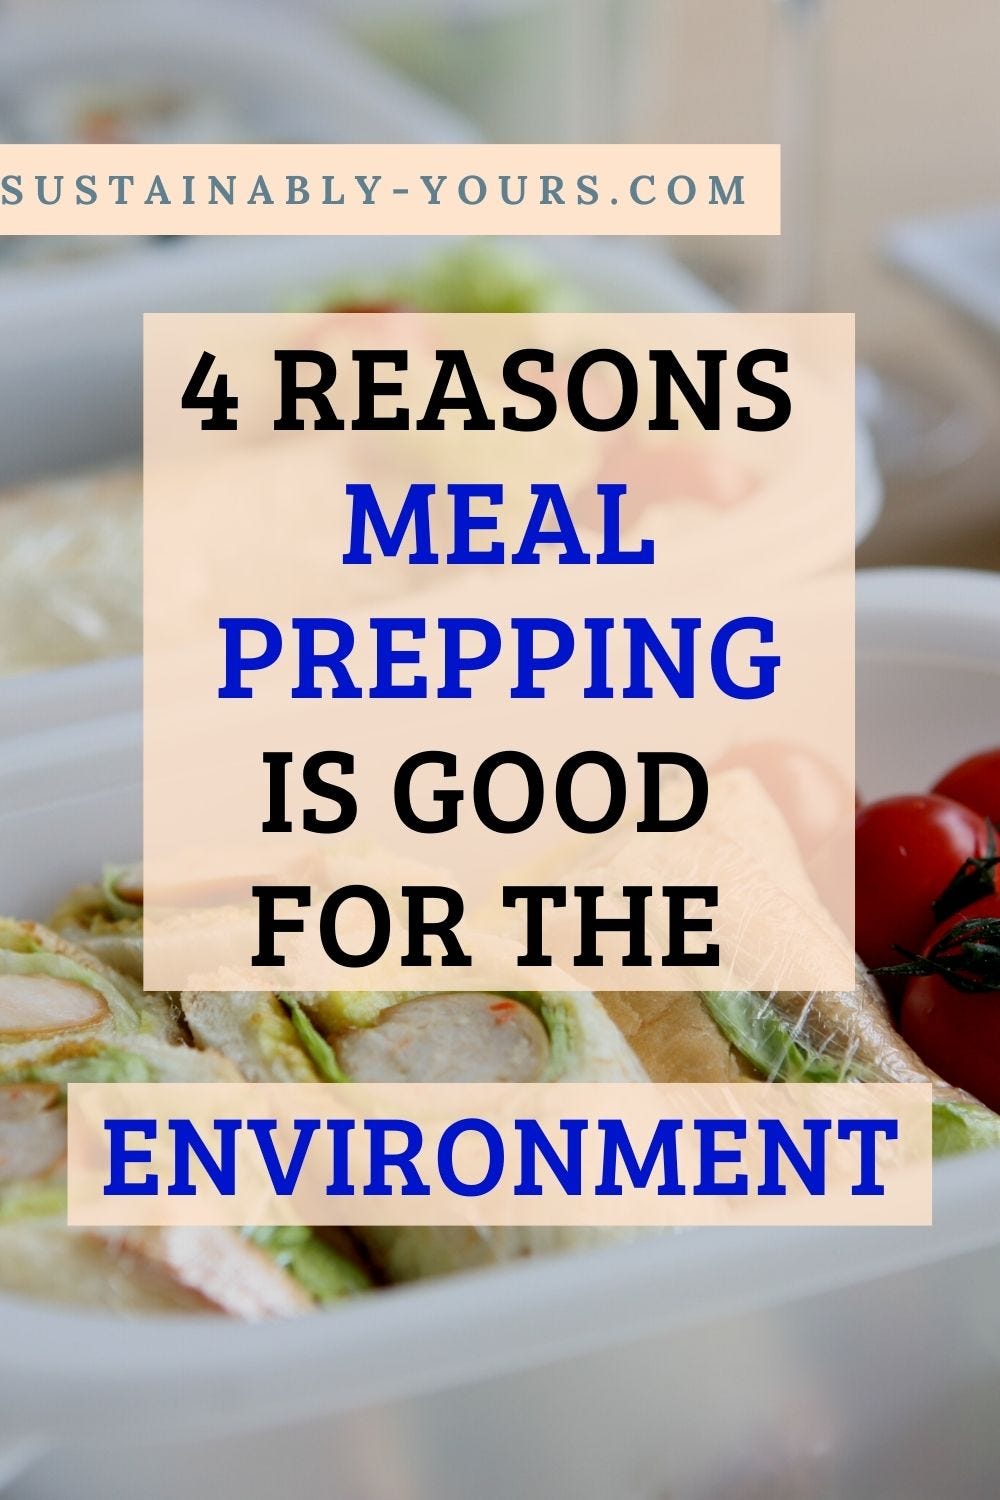 Good for you & the planet: An intro to meal prepping with reusable